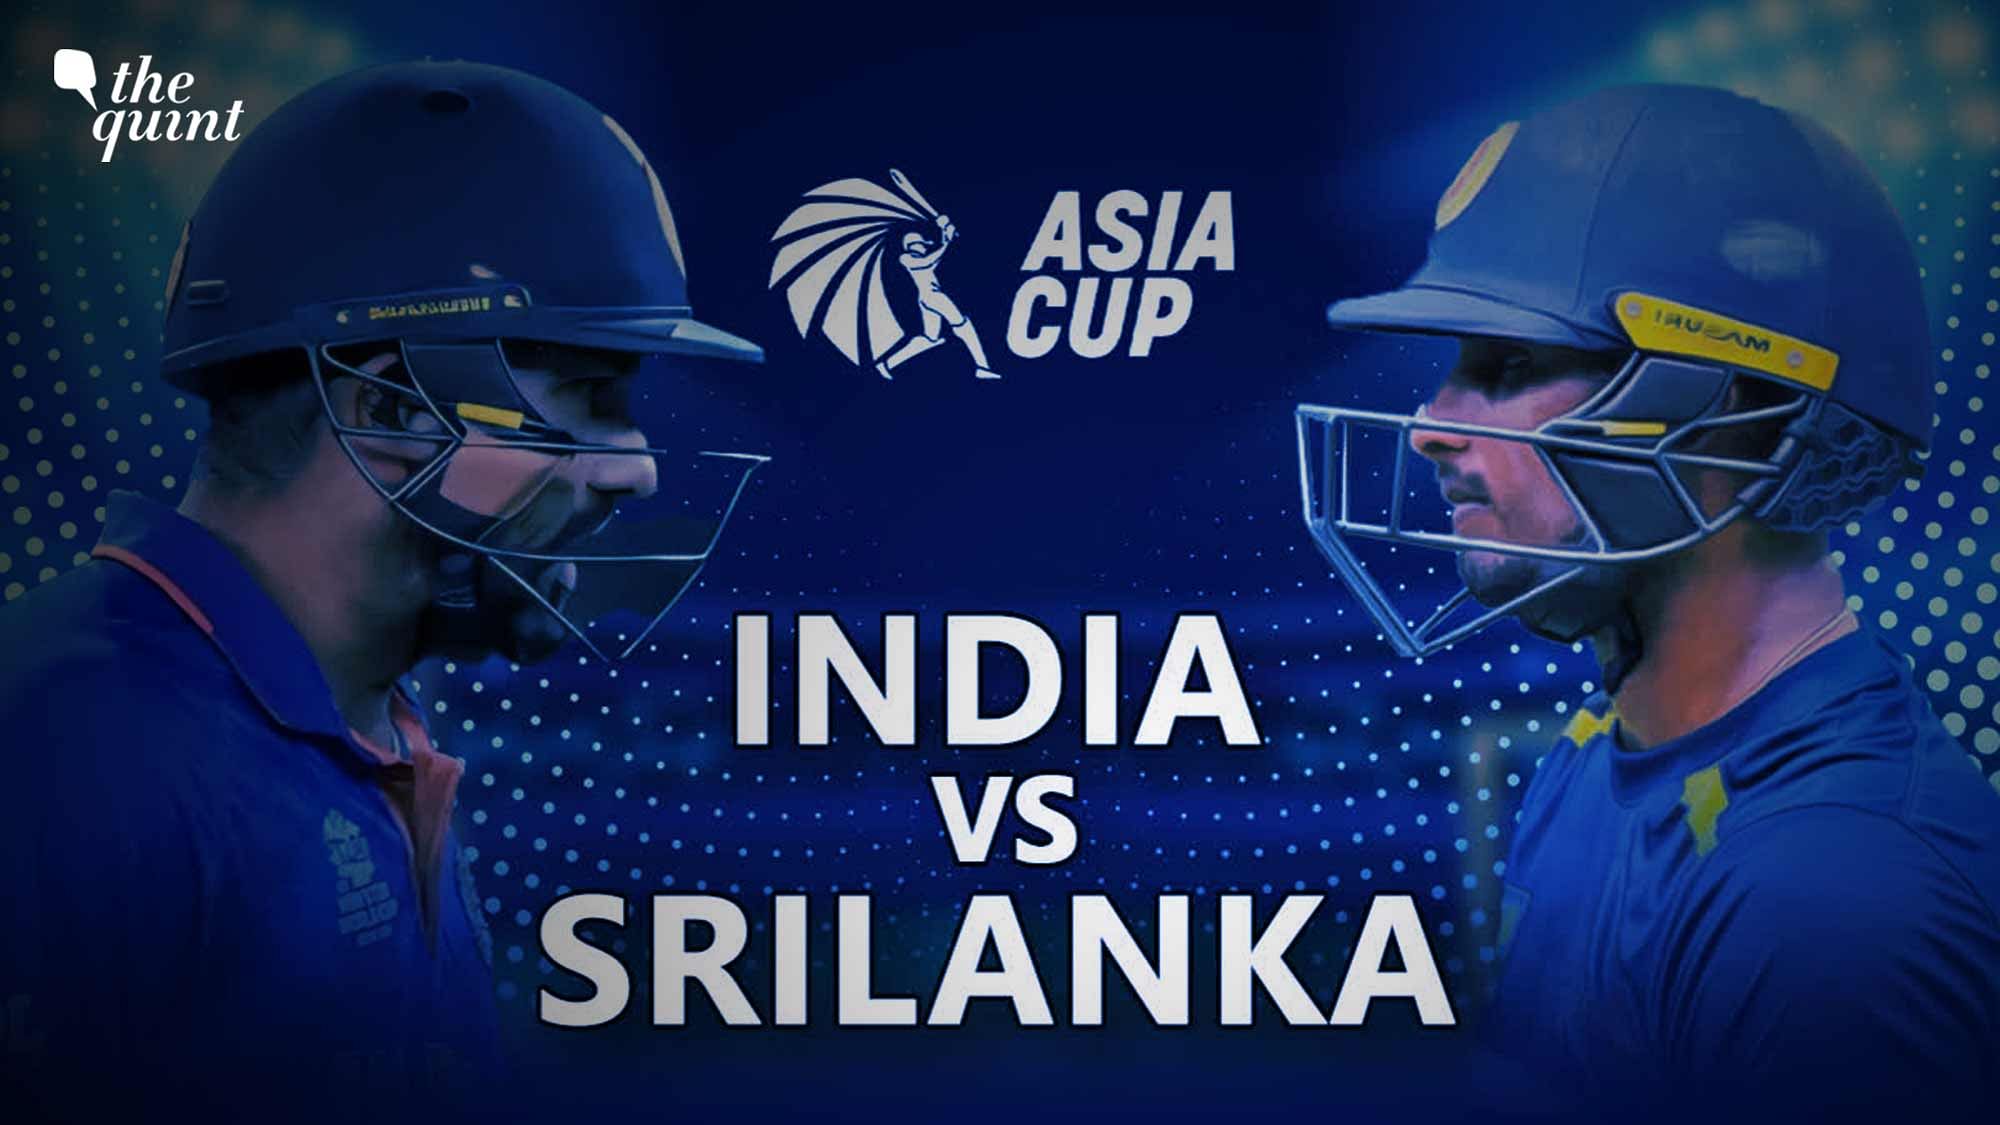 India vs Sri Lanka Asia Cup Final 2023 Date, Time, Venue, Squads, Live Streaming, Telecast, Live Scores, and More